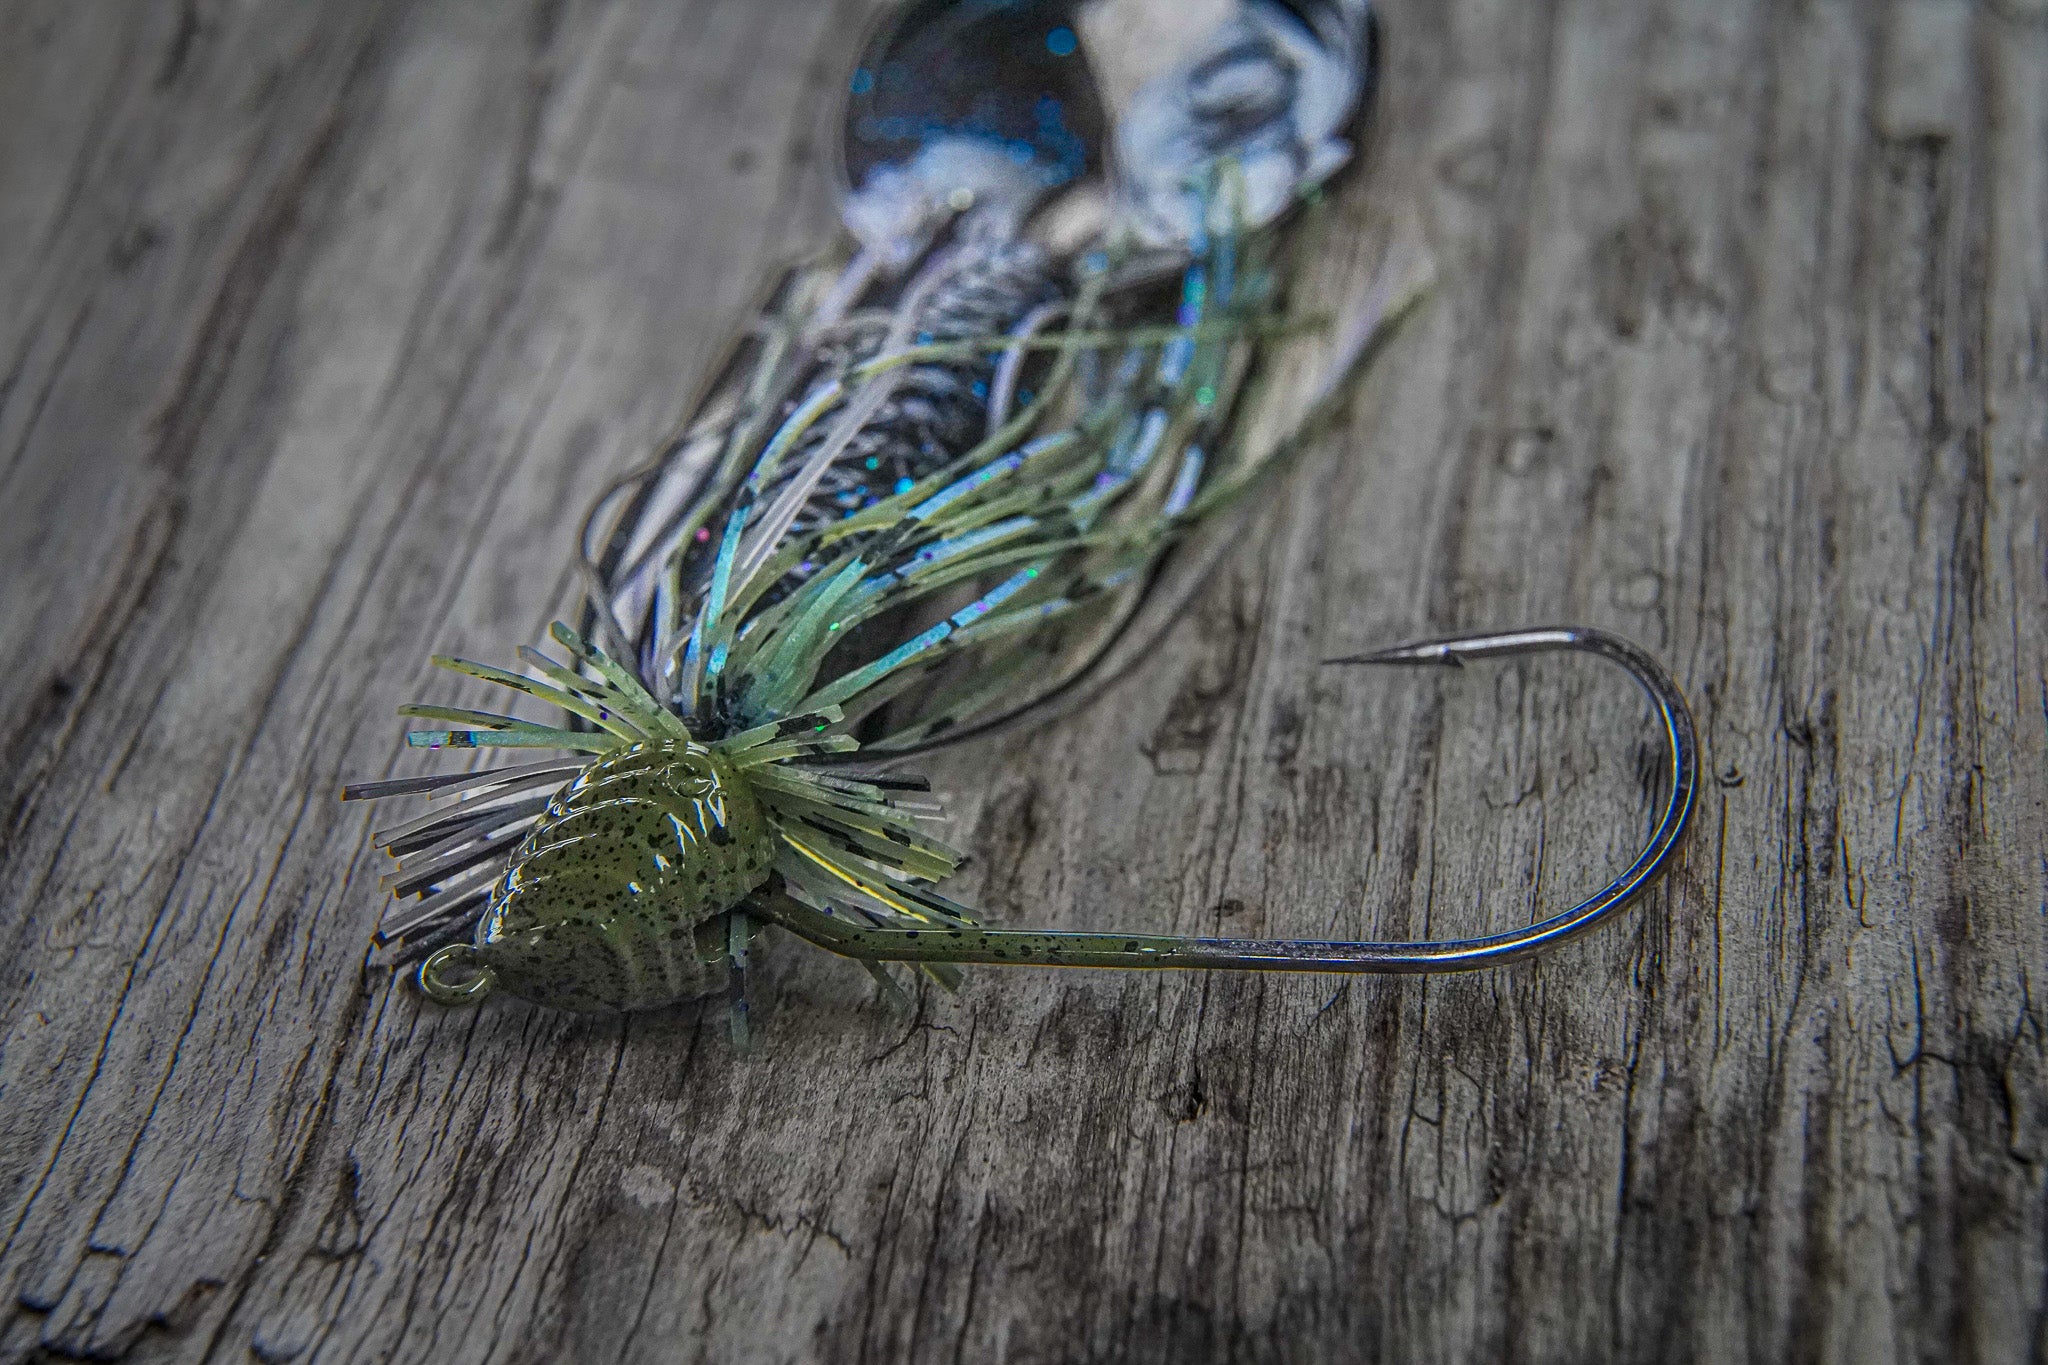 Trying New Lures // Pulse Fish Jig and Sixth Sense Craw Crankbait